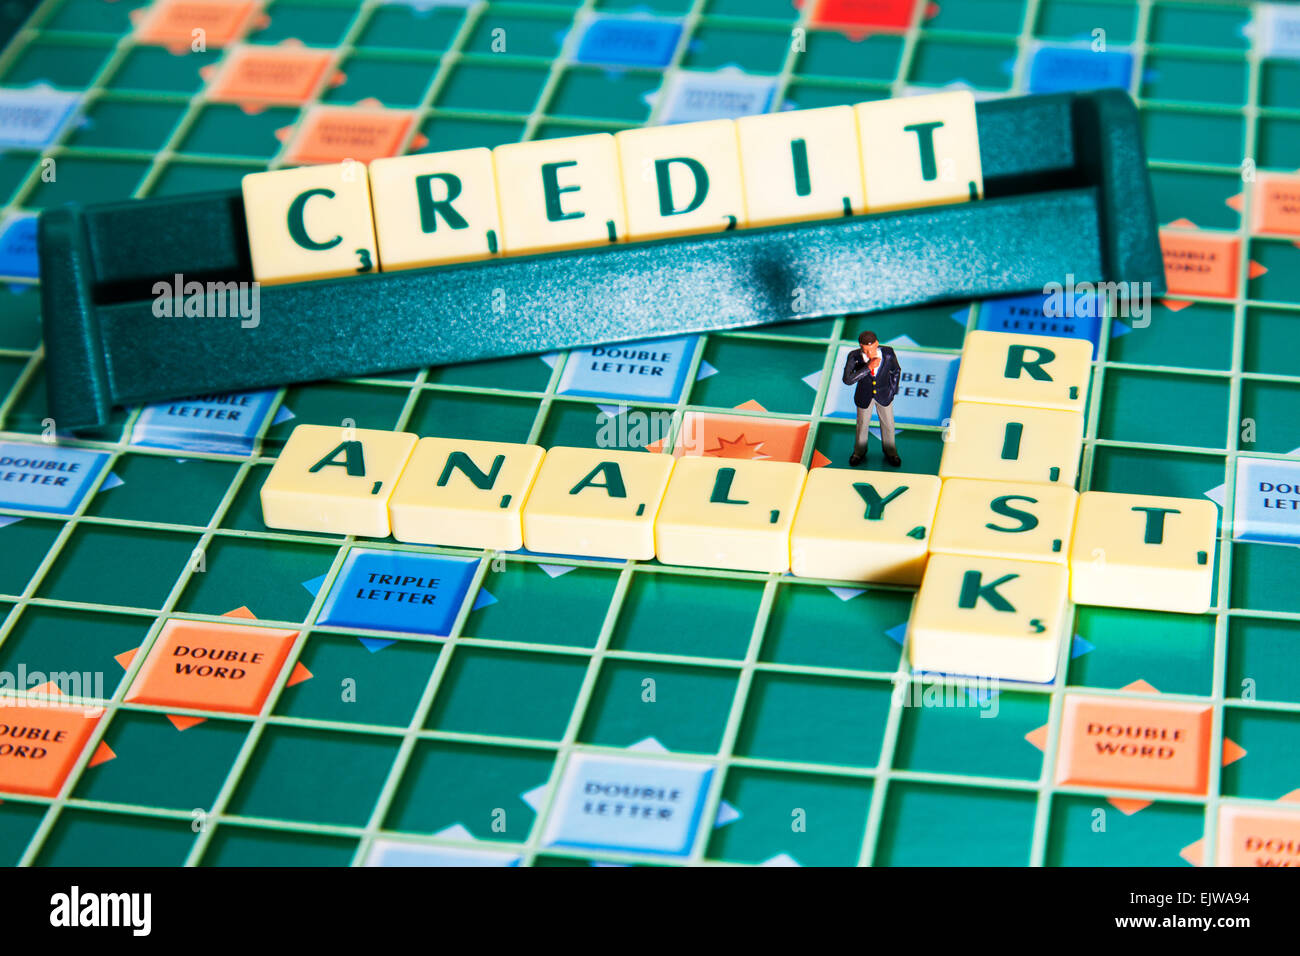 risk analyst calculates the credit creditworthiness of businesses words using scrabble tiles to spell out financial business is Stock Photo